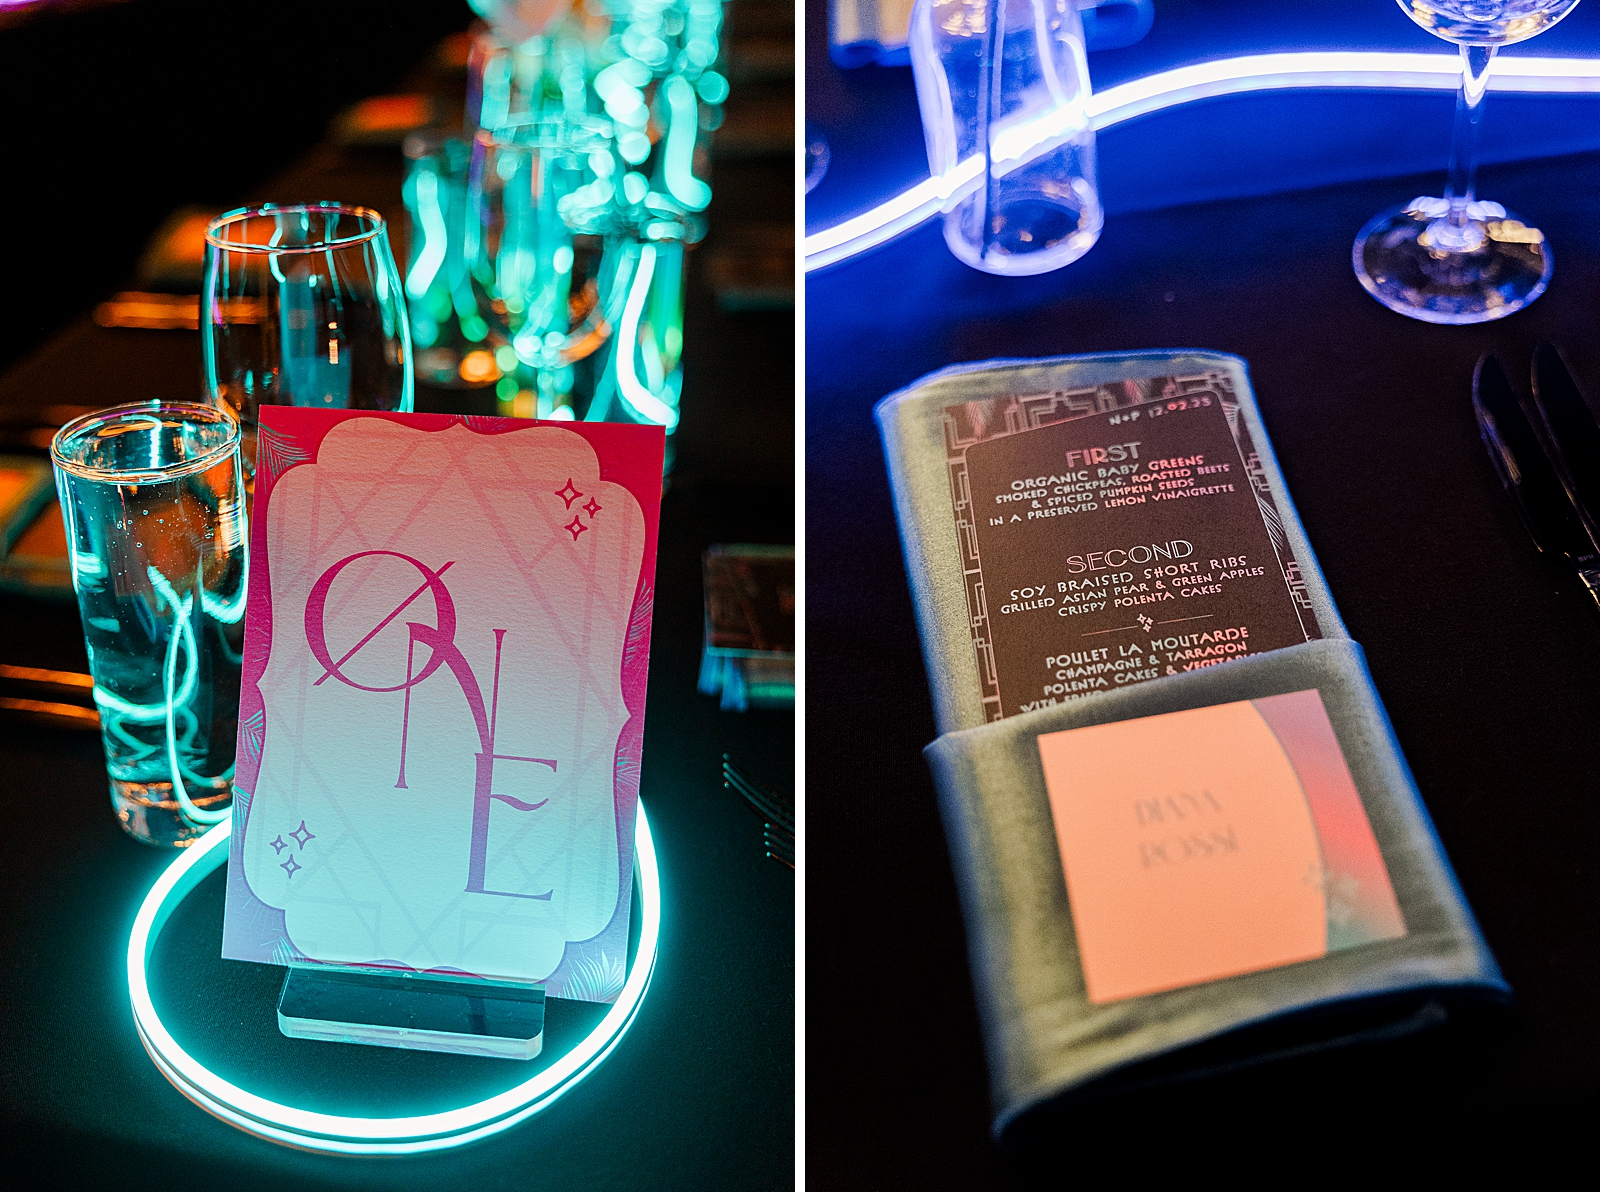 Left photo: Close up shot of a table number marker with a neon light wrapped around it. 
Right photo: Close up shot of a table napkin, menu, and place card. 